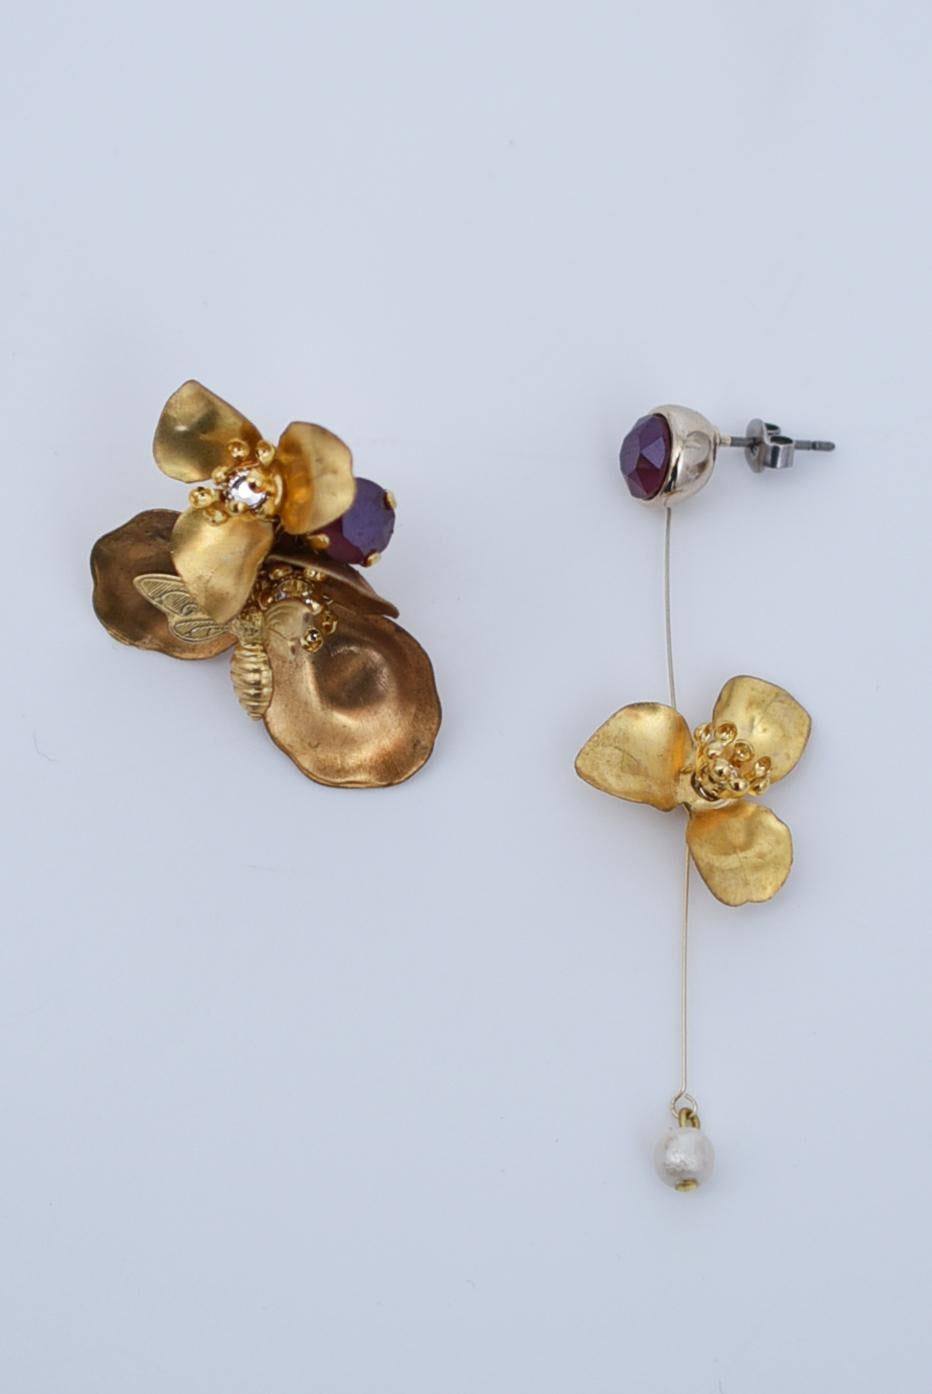 material:wood pearl,1970’s American vintage parts,swarovski,stainless
size:length 6cm

These asymmetrical earrings have one side that rests snugly on the ear and the other side swings in a line.
The line is so delicate that the flowers and pearls